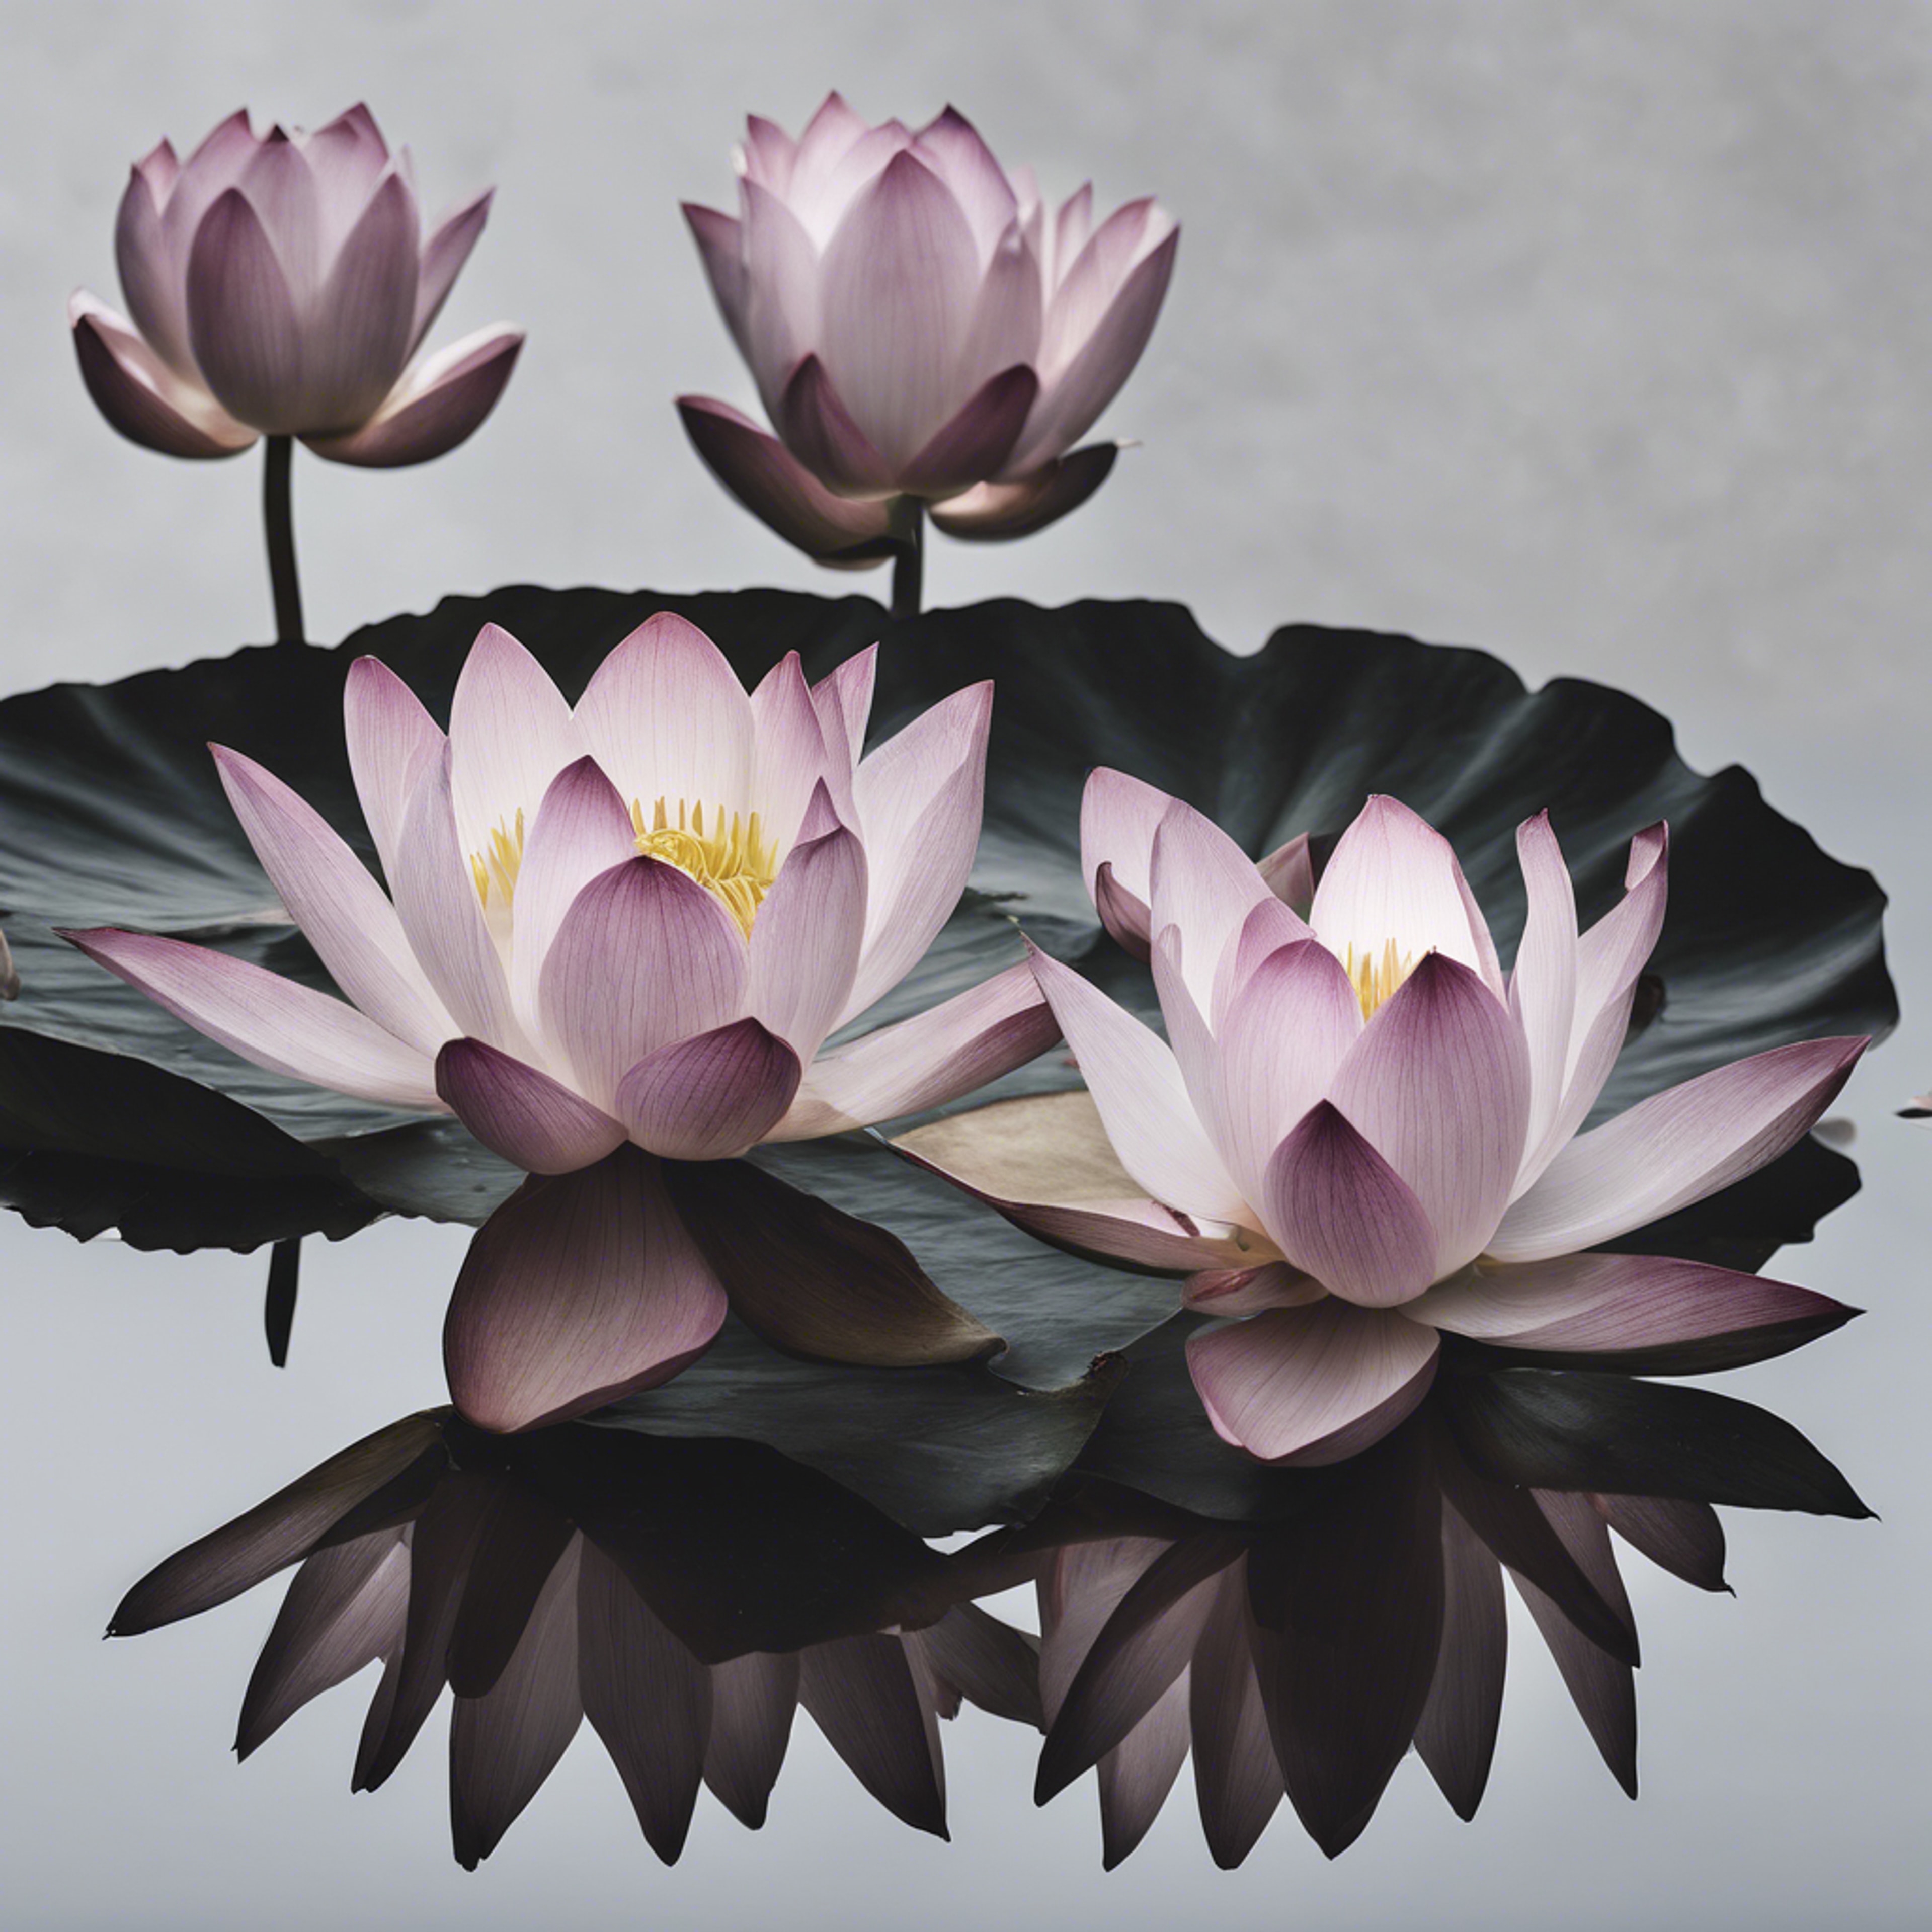 Dark lotuses floating elegantly on a textured white canvas. טפט[326d2c6a66b946e99dbc]